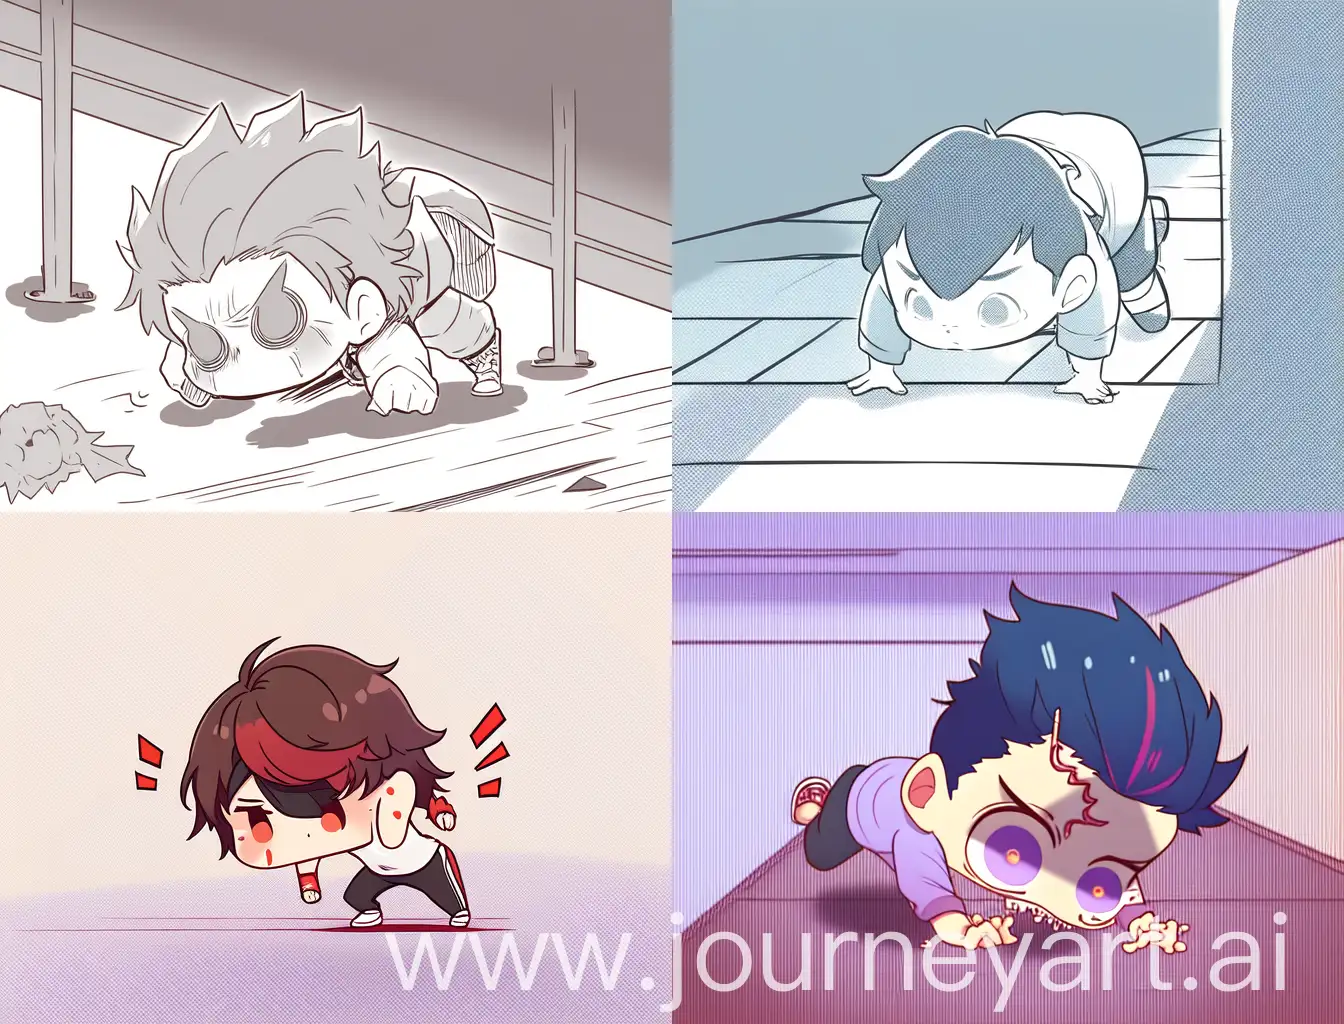 chibi boy doing push up, with horror background, cartoon anime style, strong lines